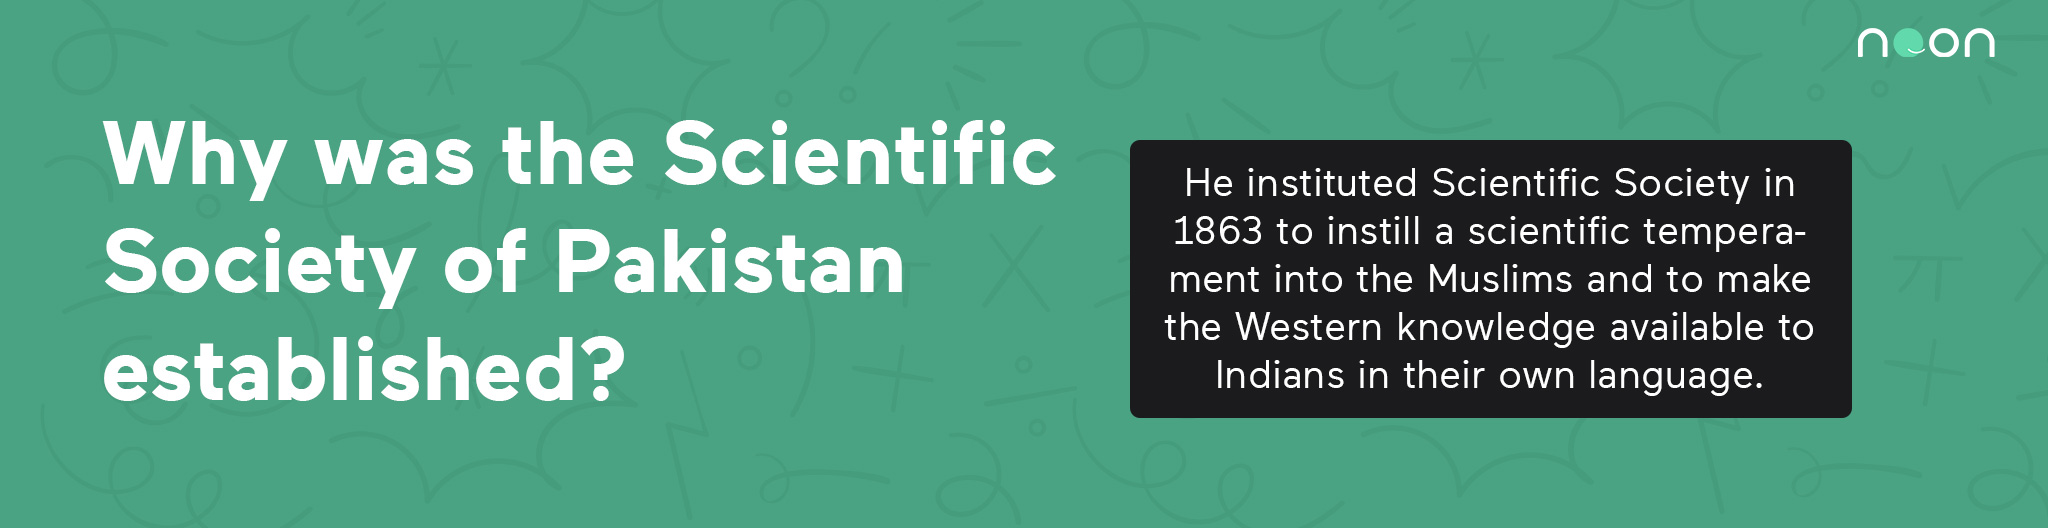 Why was the Scientific Society of Pakistan established